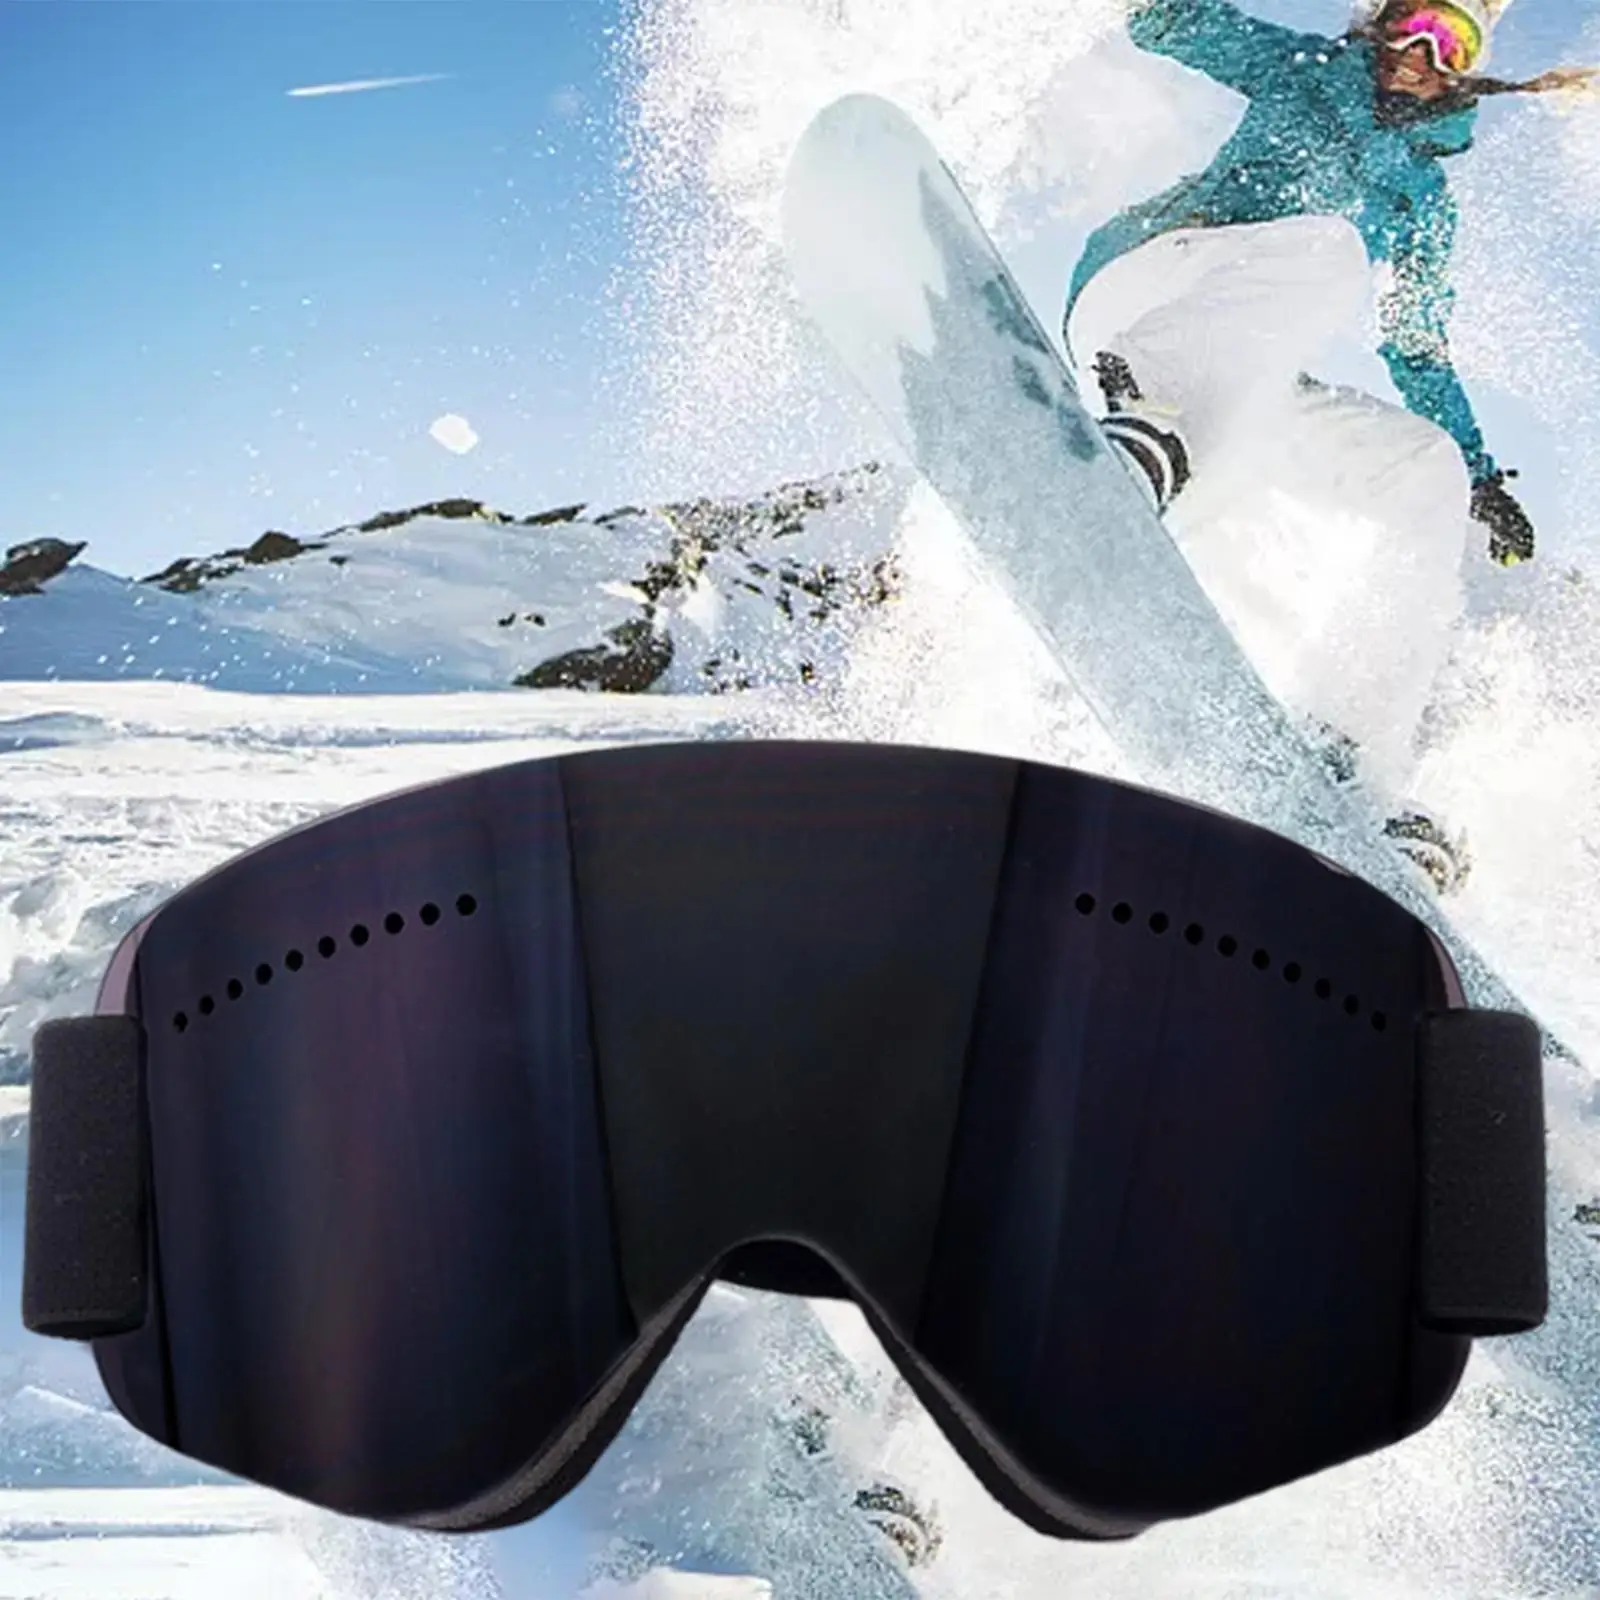 Ski Goggles UV Protection Snow Goggle for Skate Outdoor Sports Motorcycle